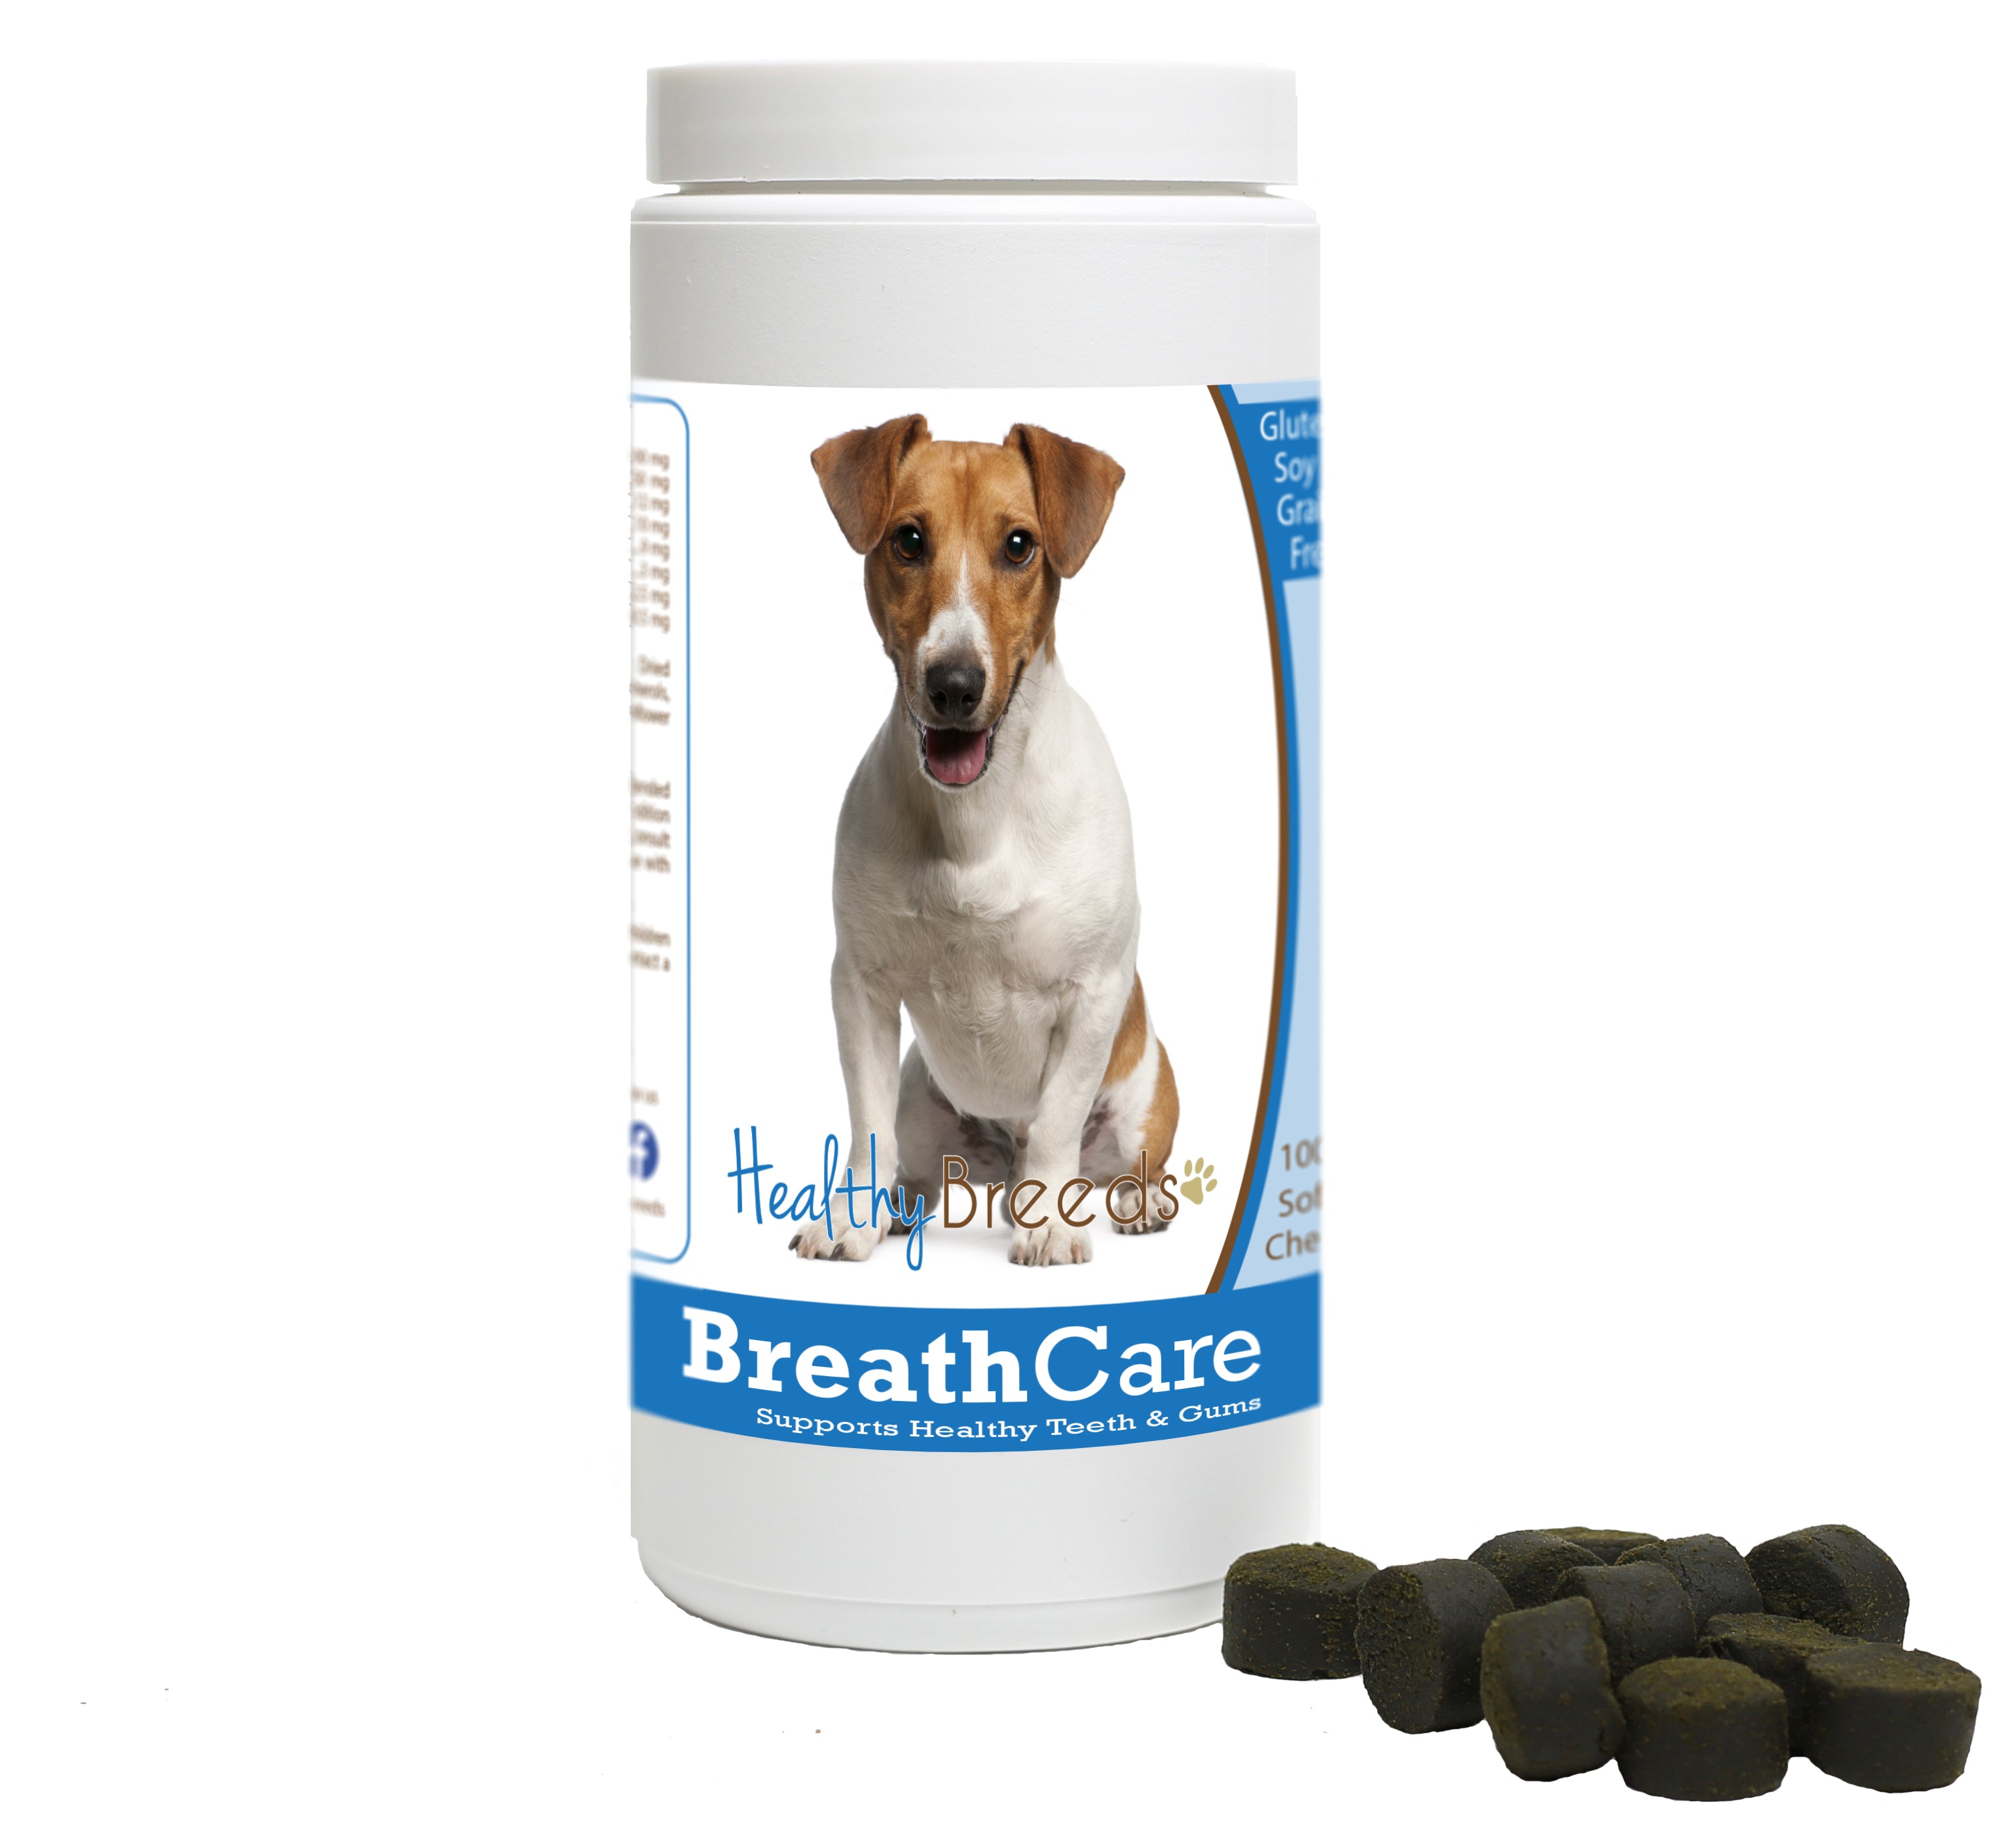 Jack Russell Terrier Breath Care Soft Chews for Dogs 60 Count